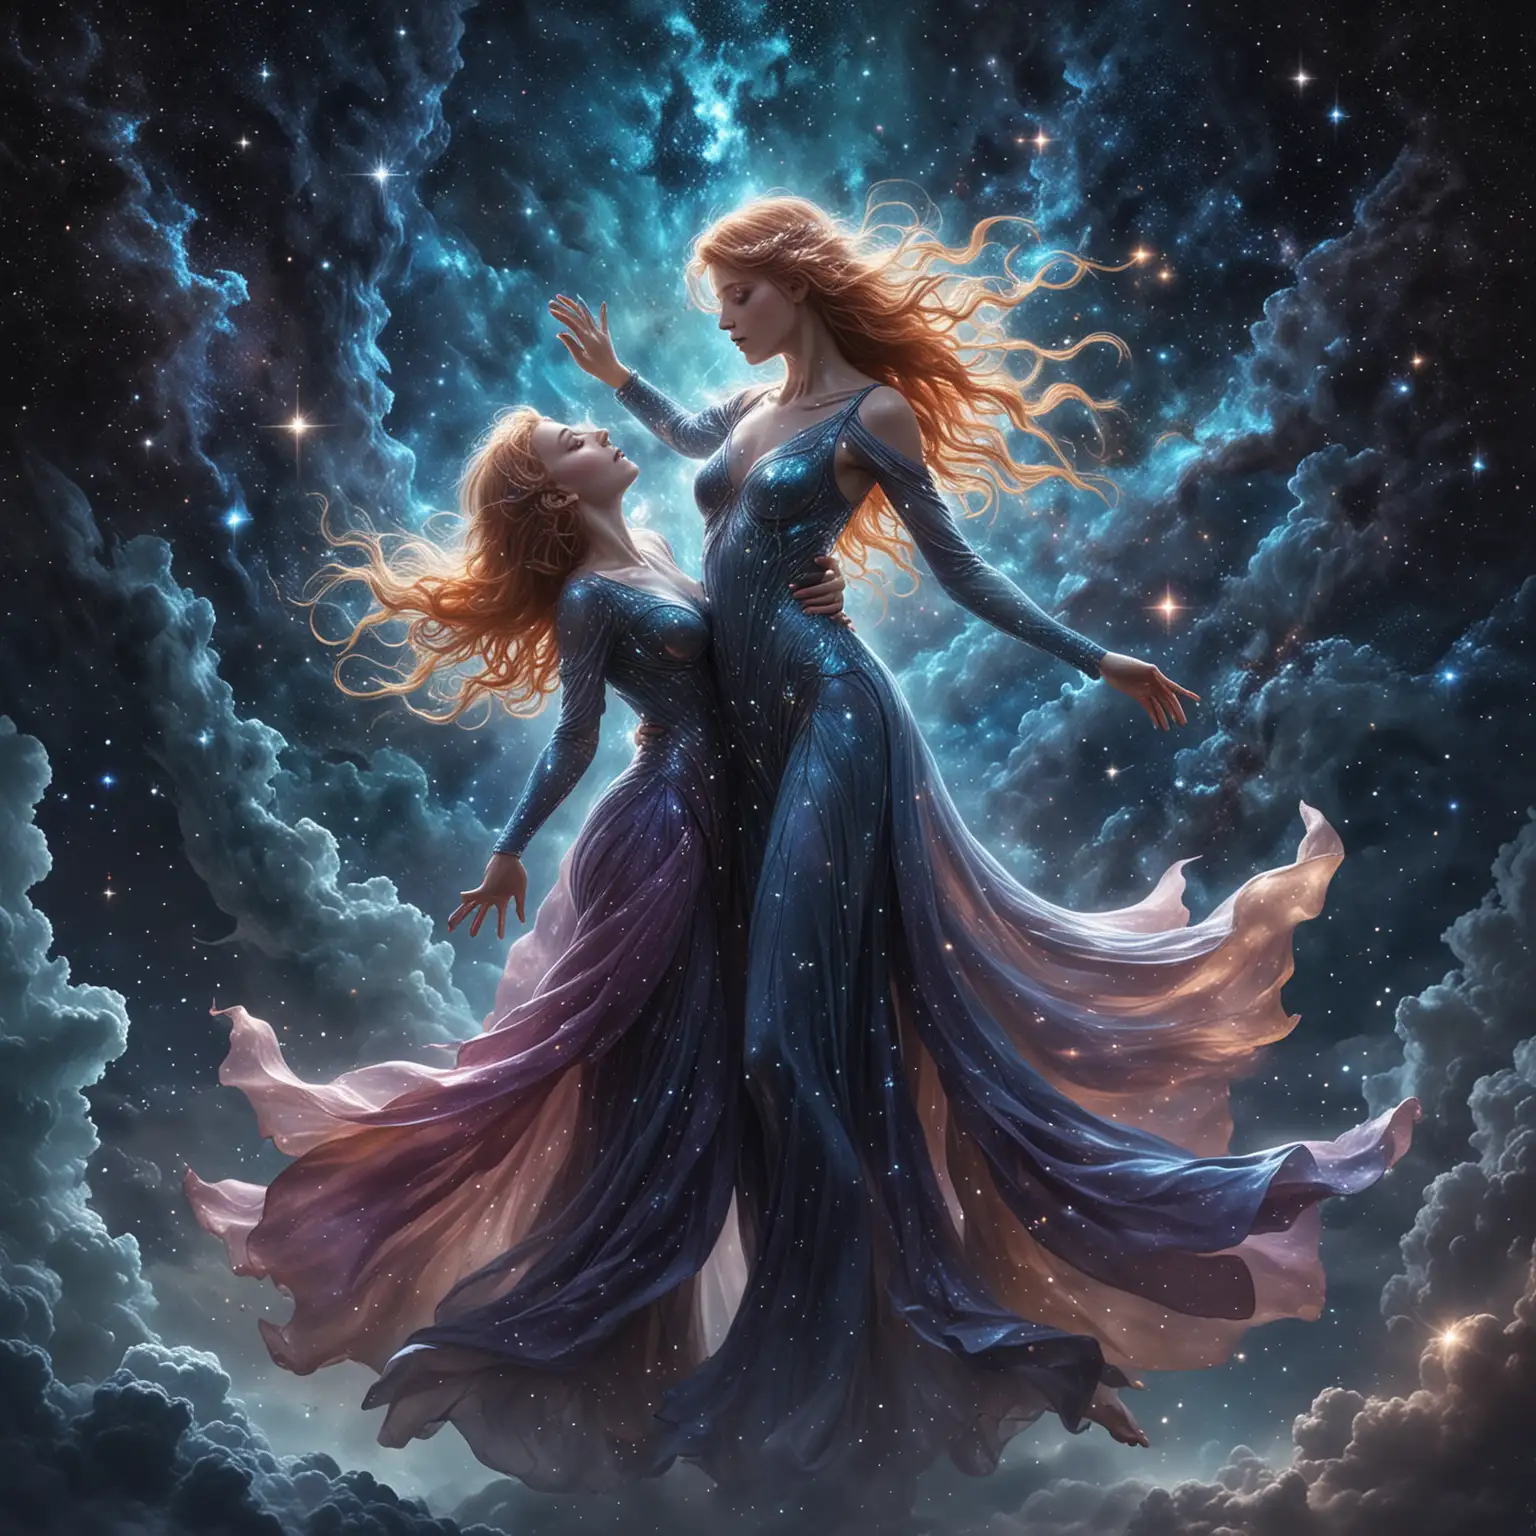 Mythical Beings in Stardust Embrace A Celestial Realm of Dancing Constellations and Singing Nebulae